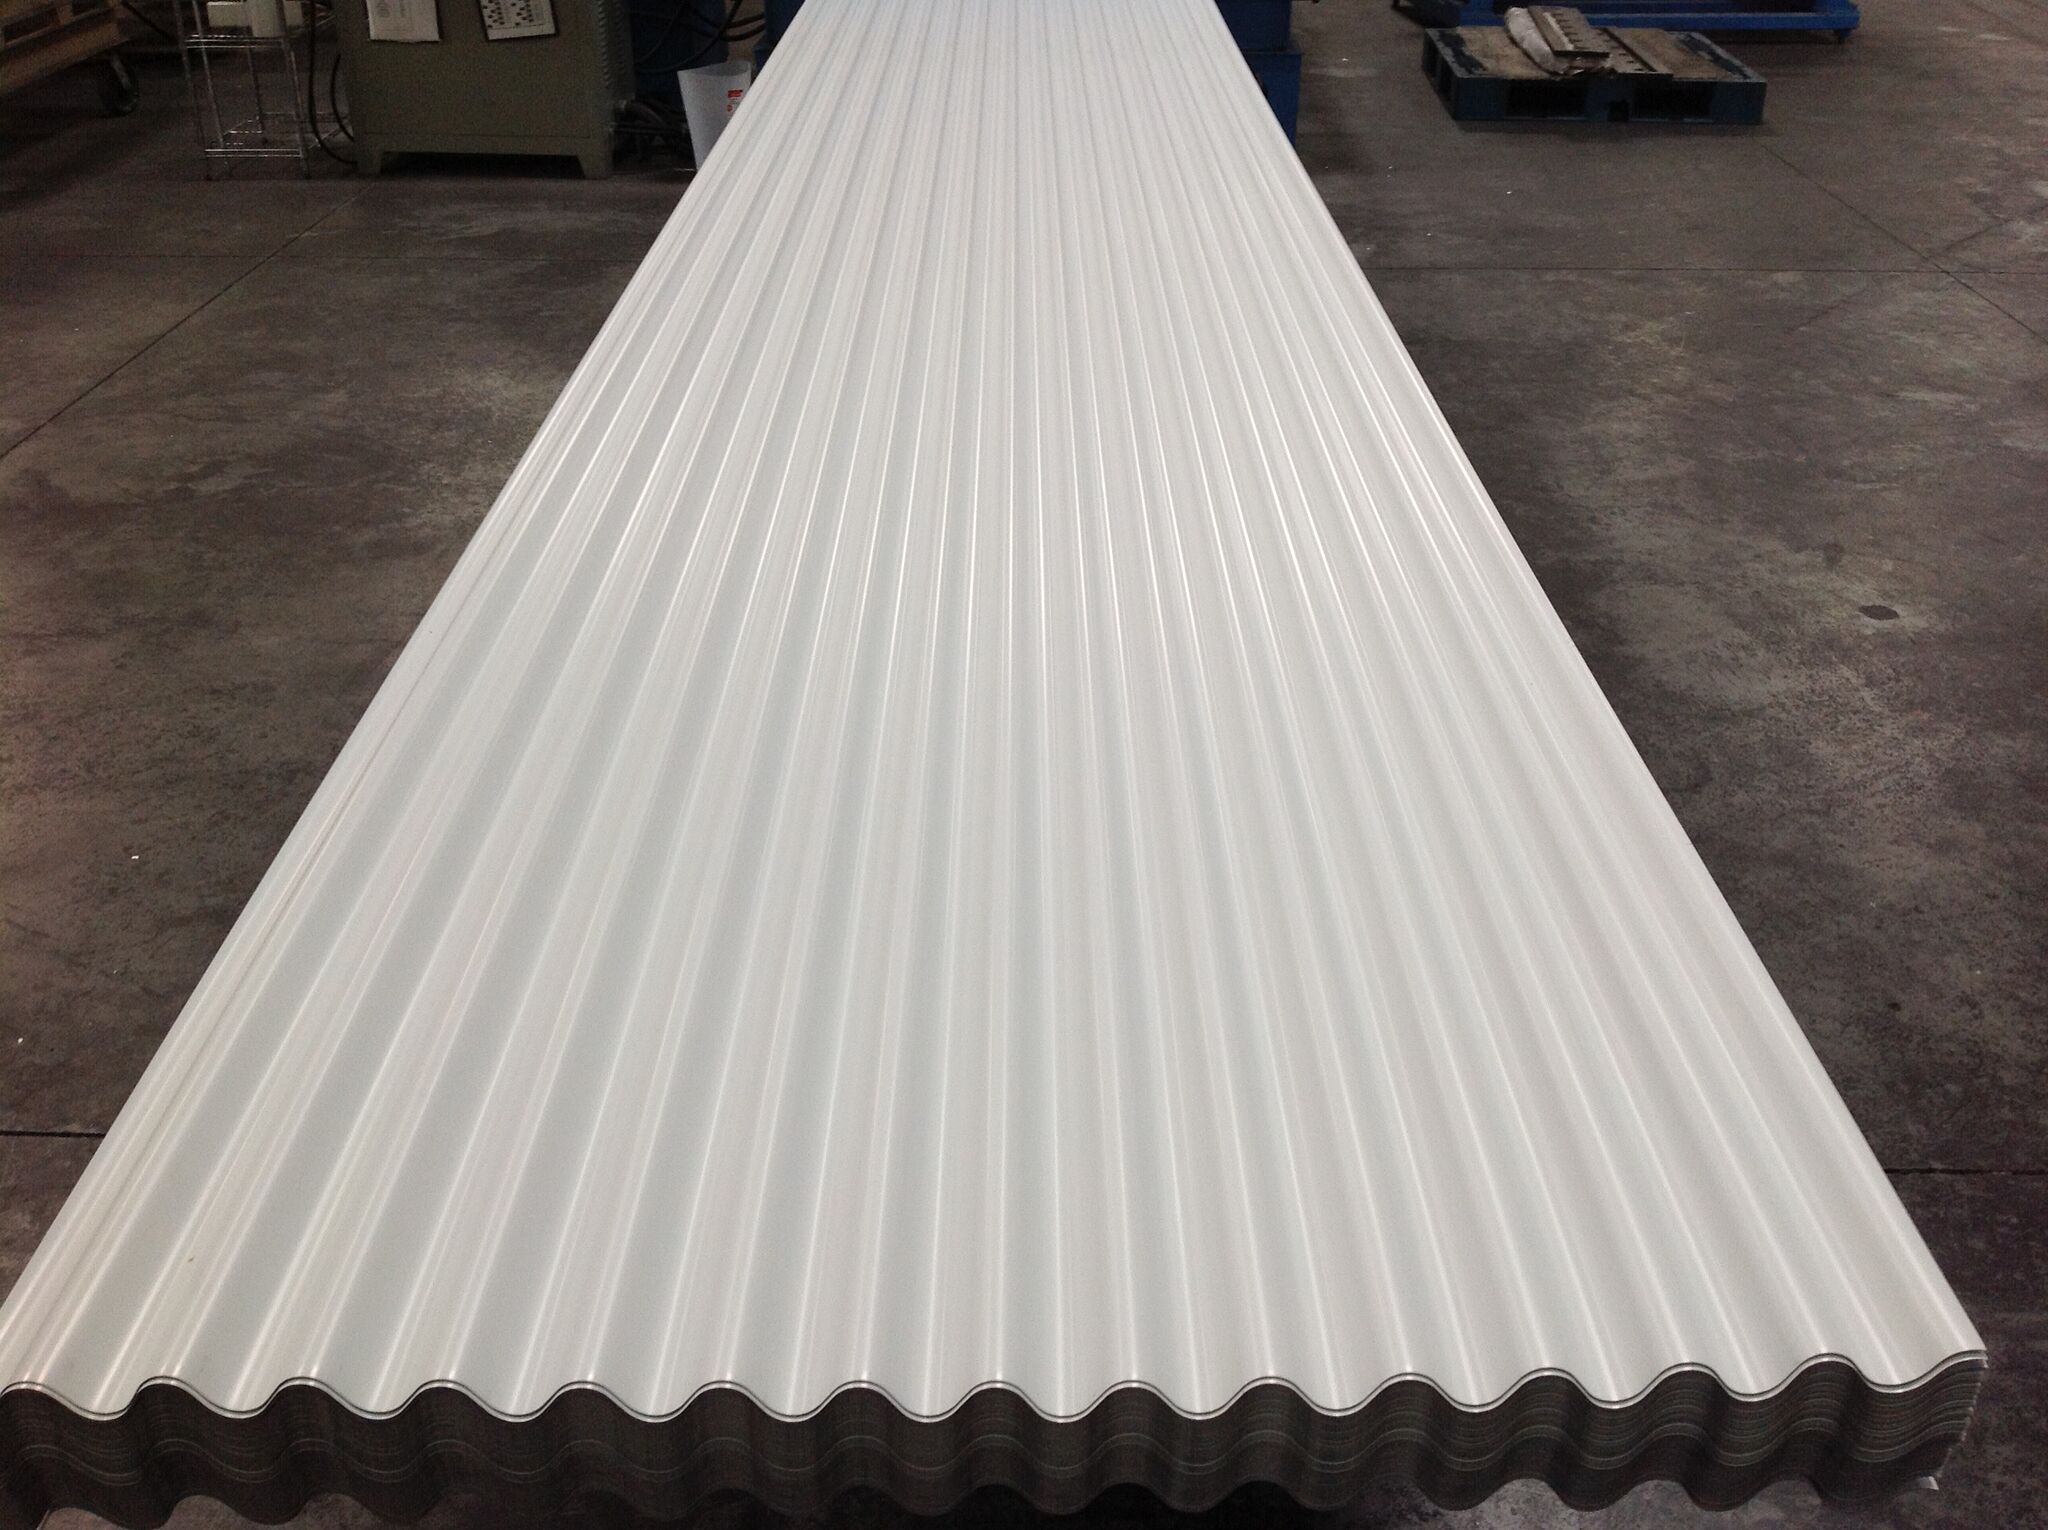 Galvalume Corrugated Sheet 78c26glm10 Industrial Metal Supply